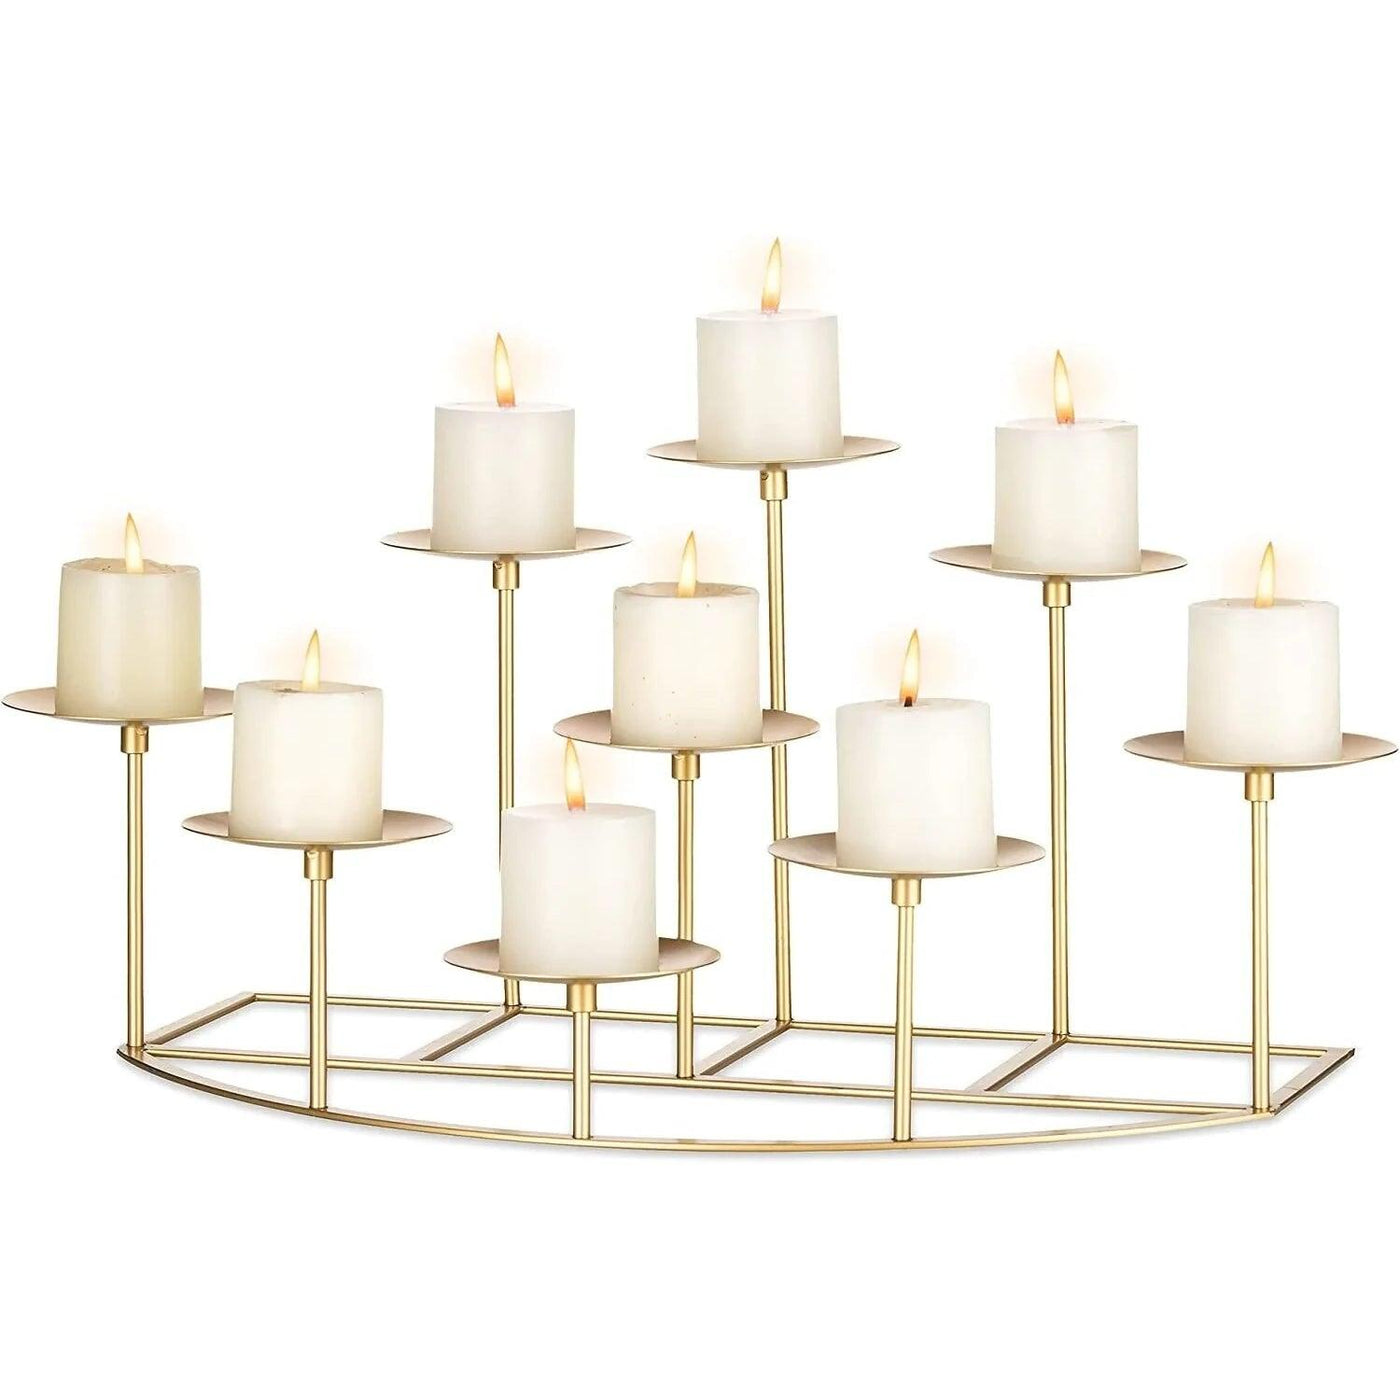 Pillar Candle Holders Mantelpiece Candelabra with 9 Candle Stands Gold - Massive Discounts